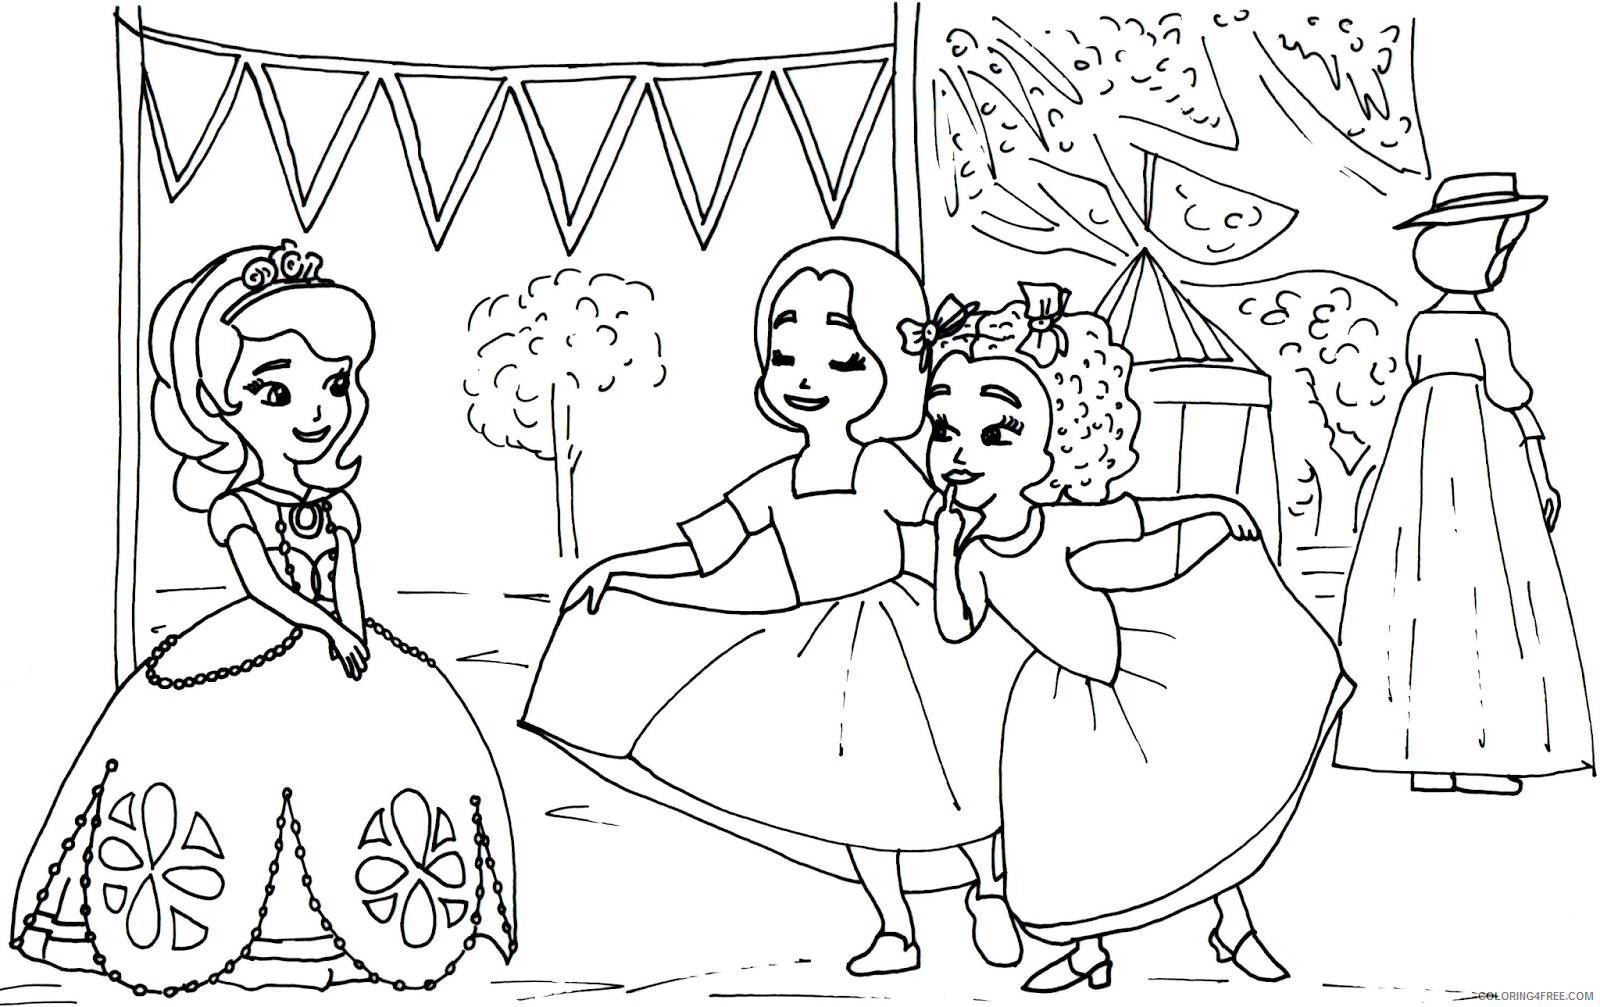 Sofia the First Coloring Pages Cartoons Sofia the First Frees Printable 2020 5877 Coloring4free